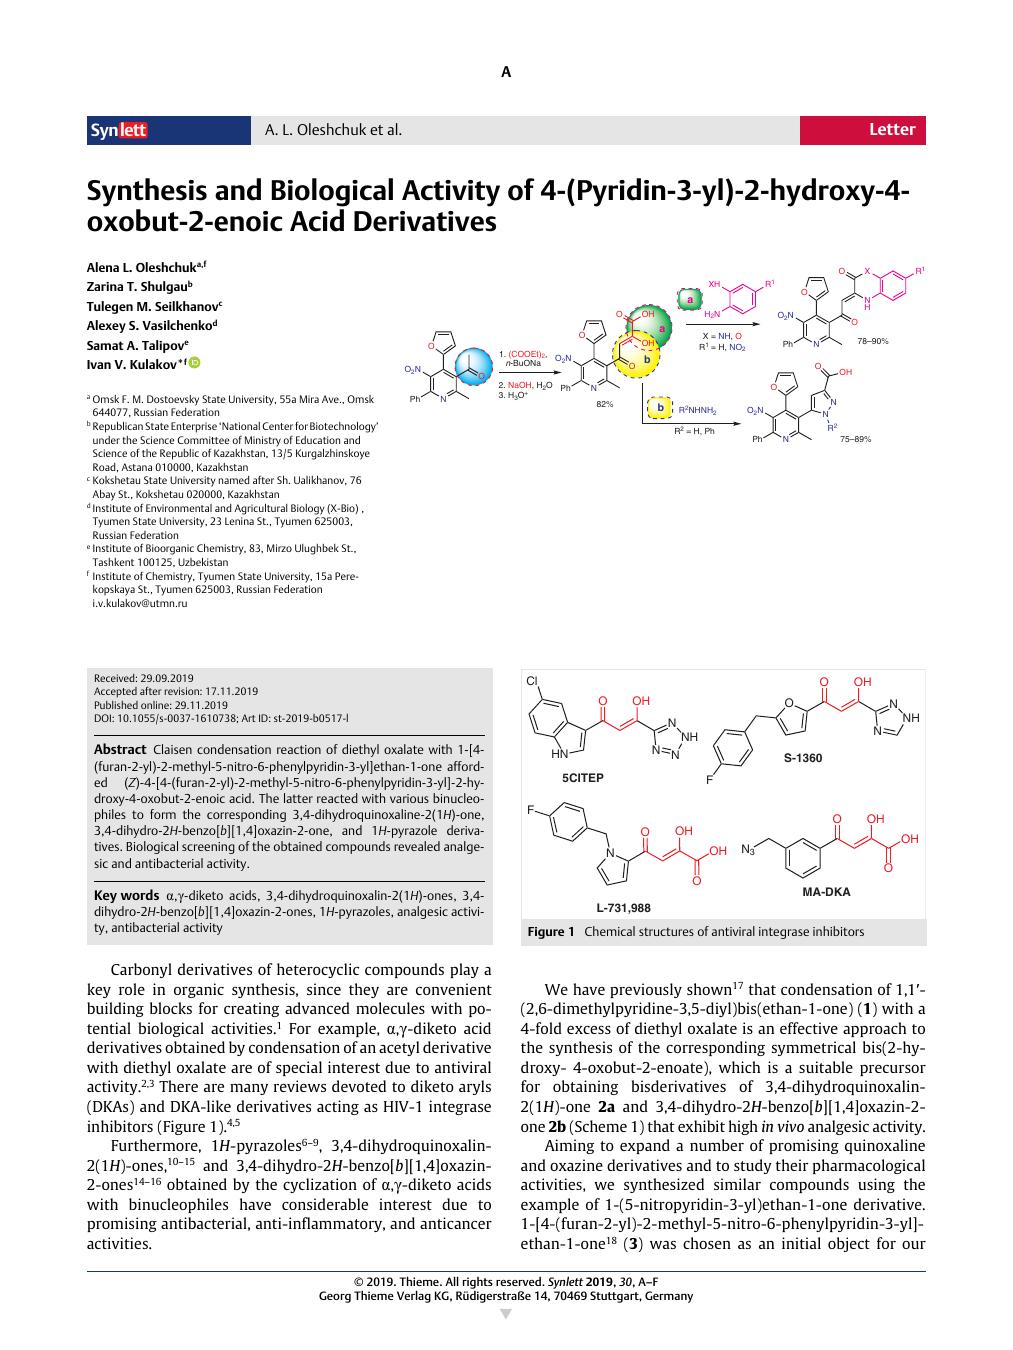 Synthesis And Biological Activity Of 4 Pyridin 3 Yl 2 Hydroxy 4 Oxobut 2 Enoic Acid Derivatives Synlett X Mol